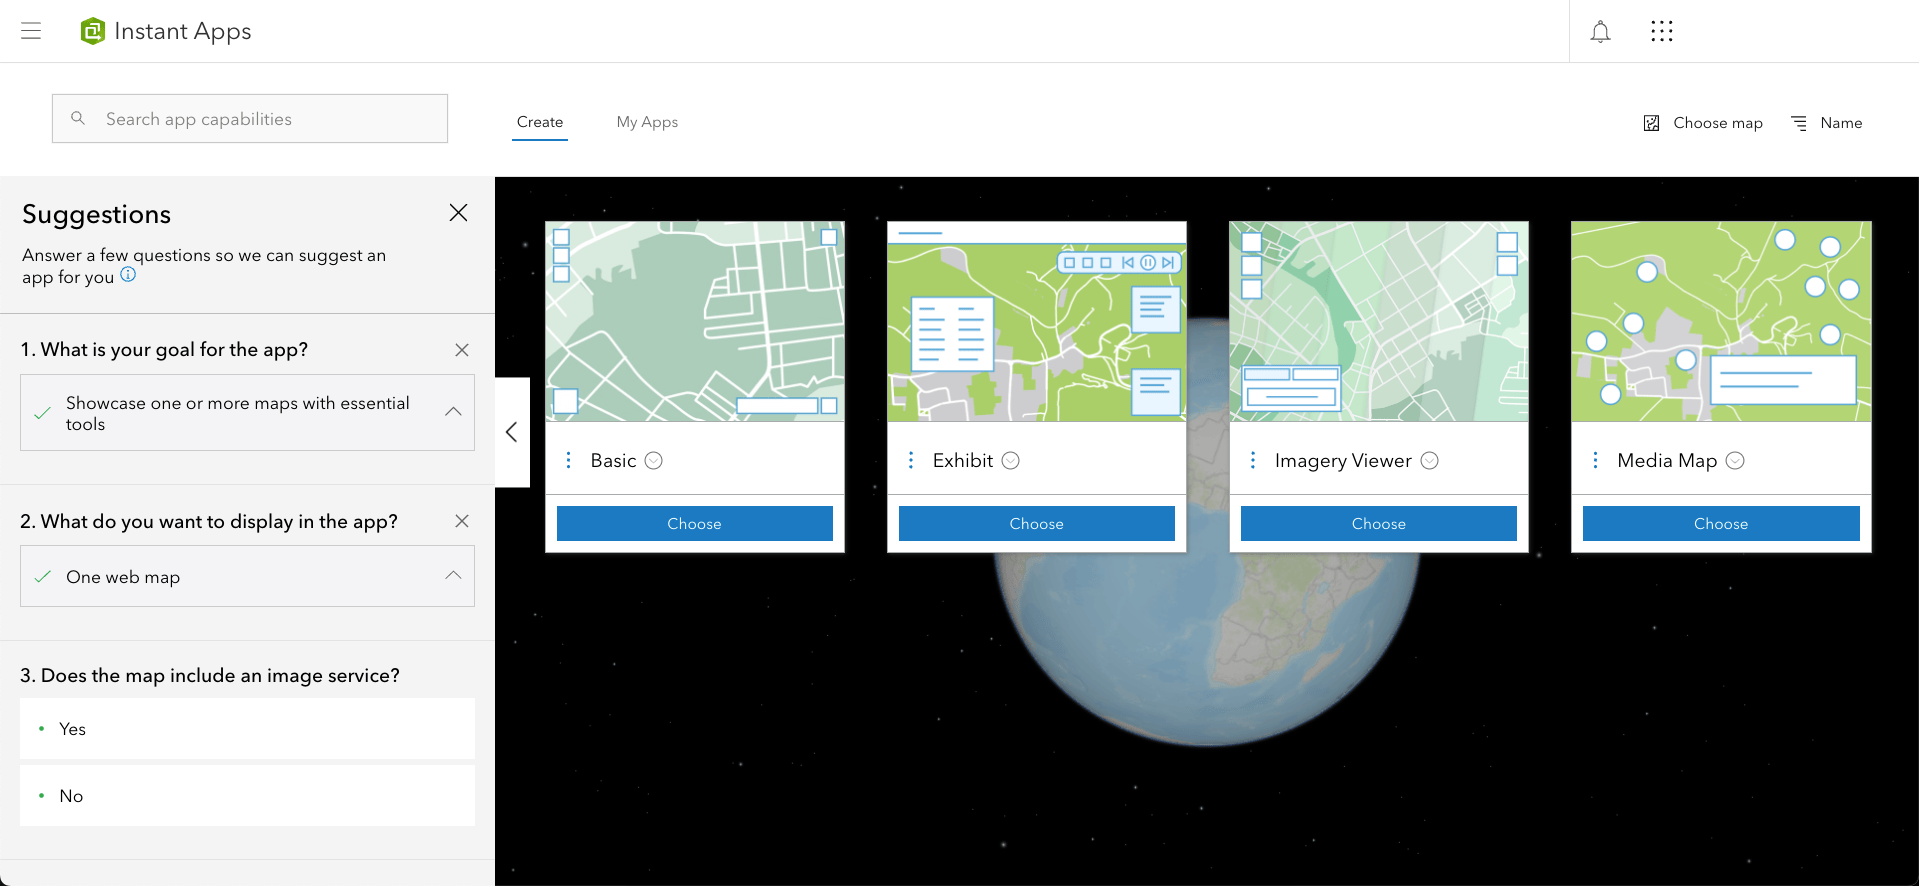 ArcGIS Instant Apps now have a suggestion panel that opens by default when creating apps to help you choose the perfect app.